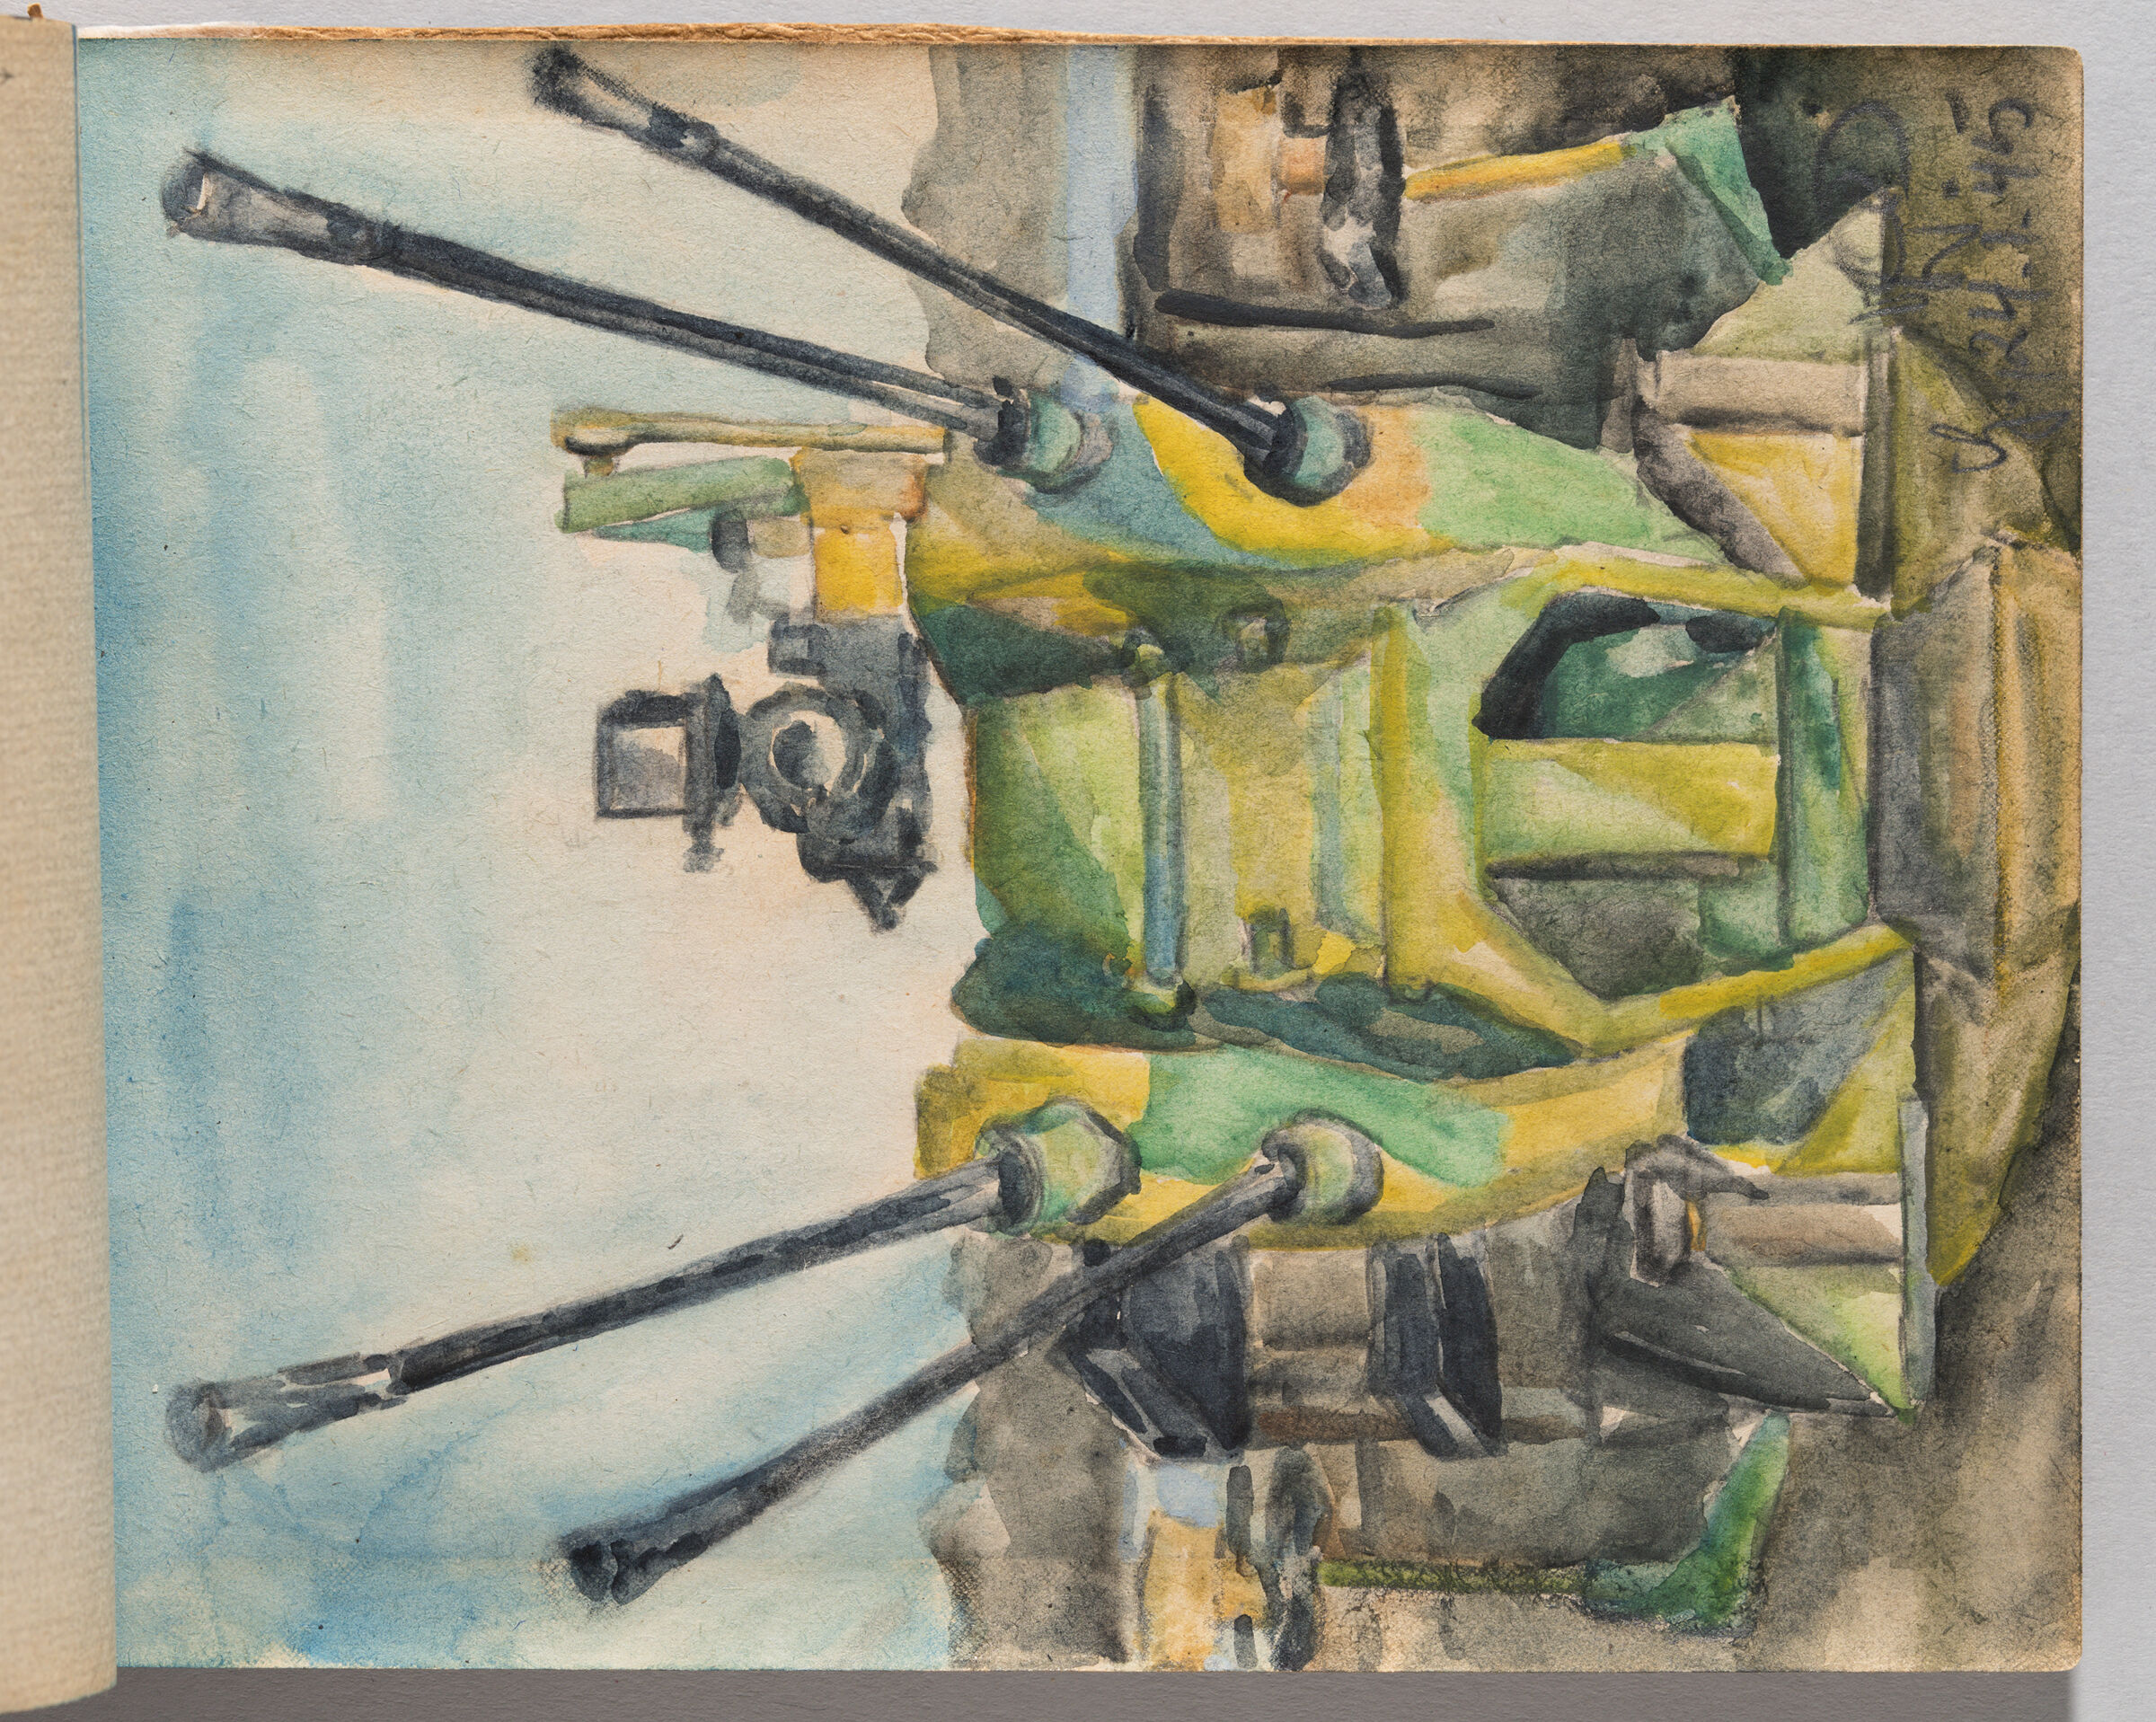 Untitled (Blank, Left Page); Untitled (German Anti-Aircraft Gun, Right Page)